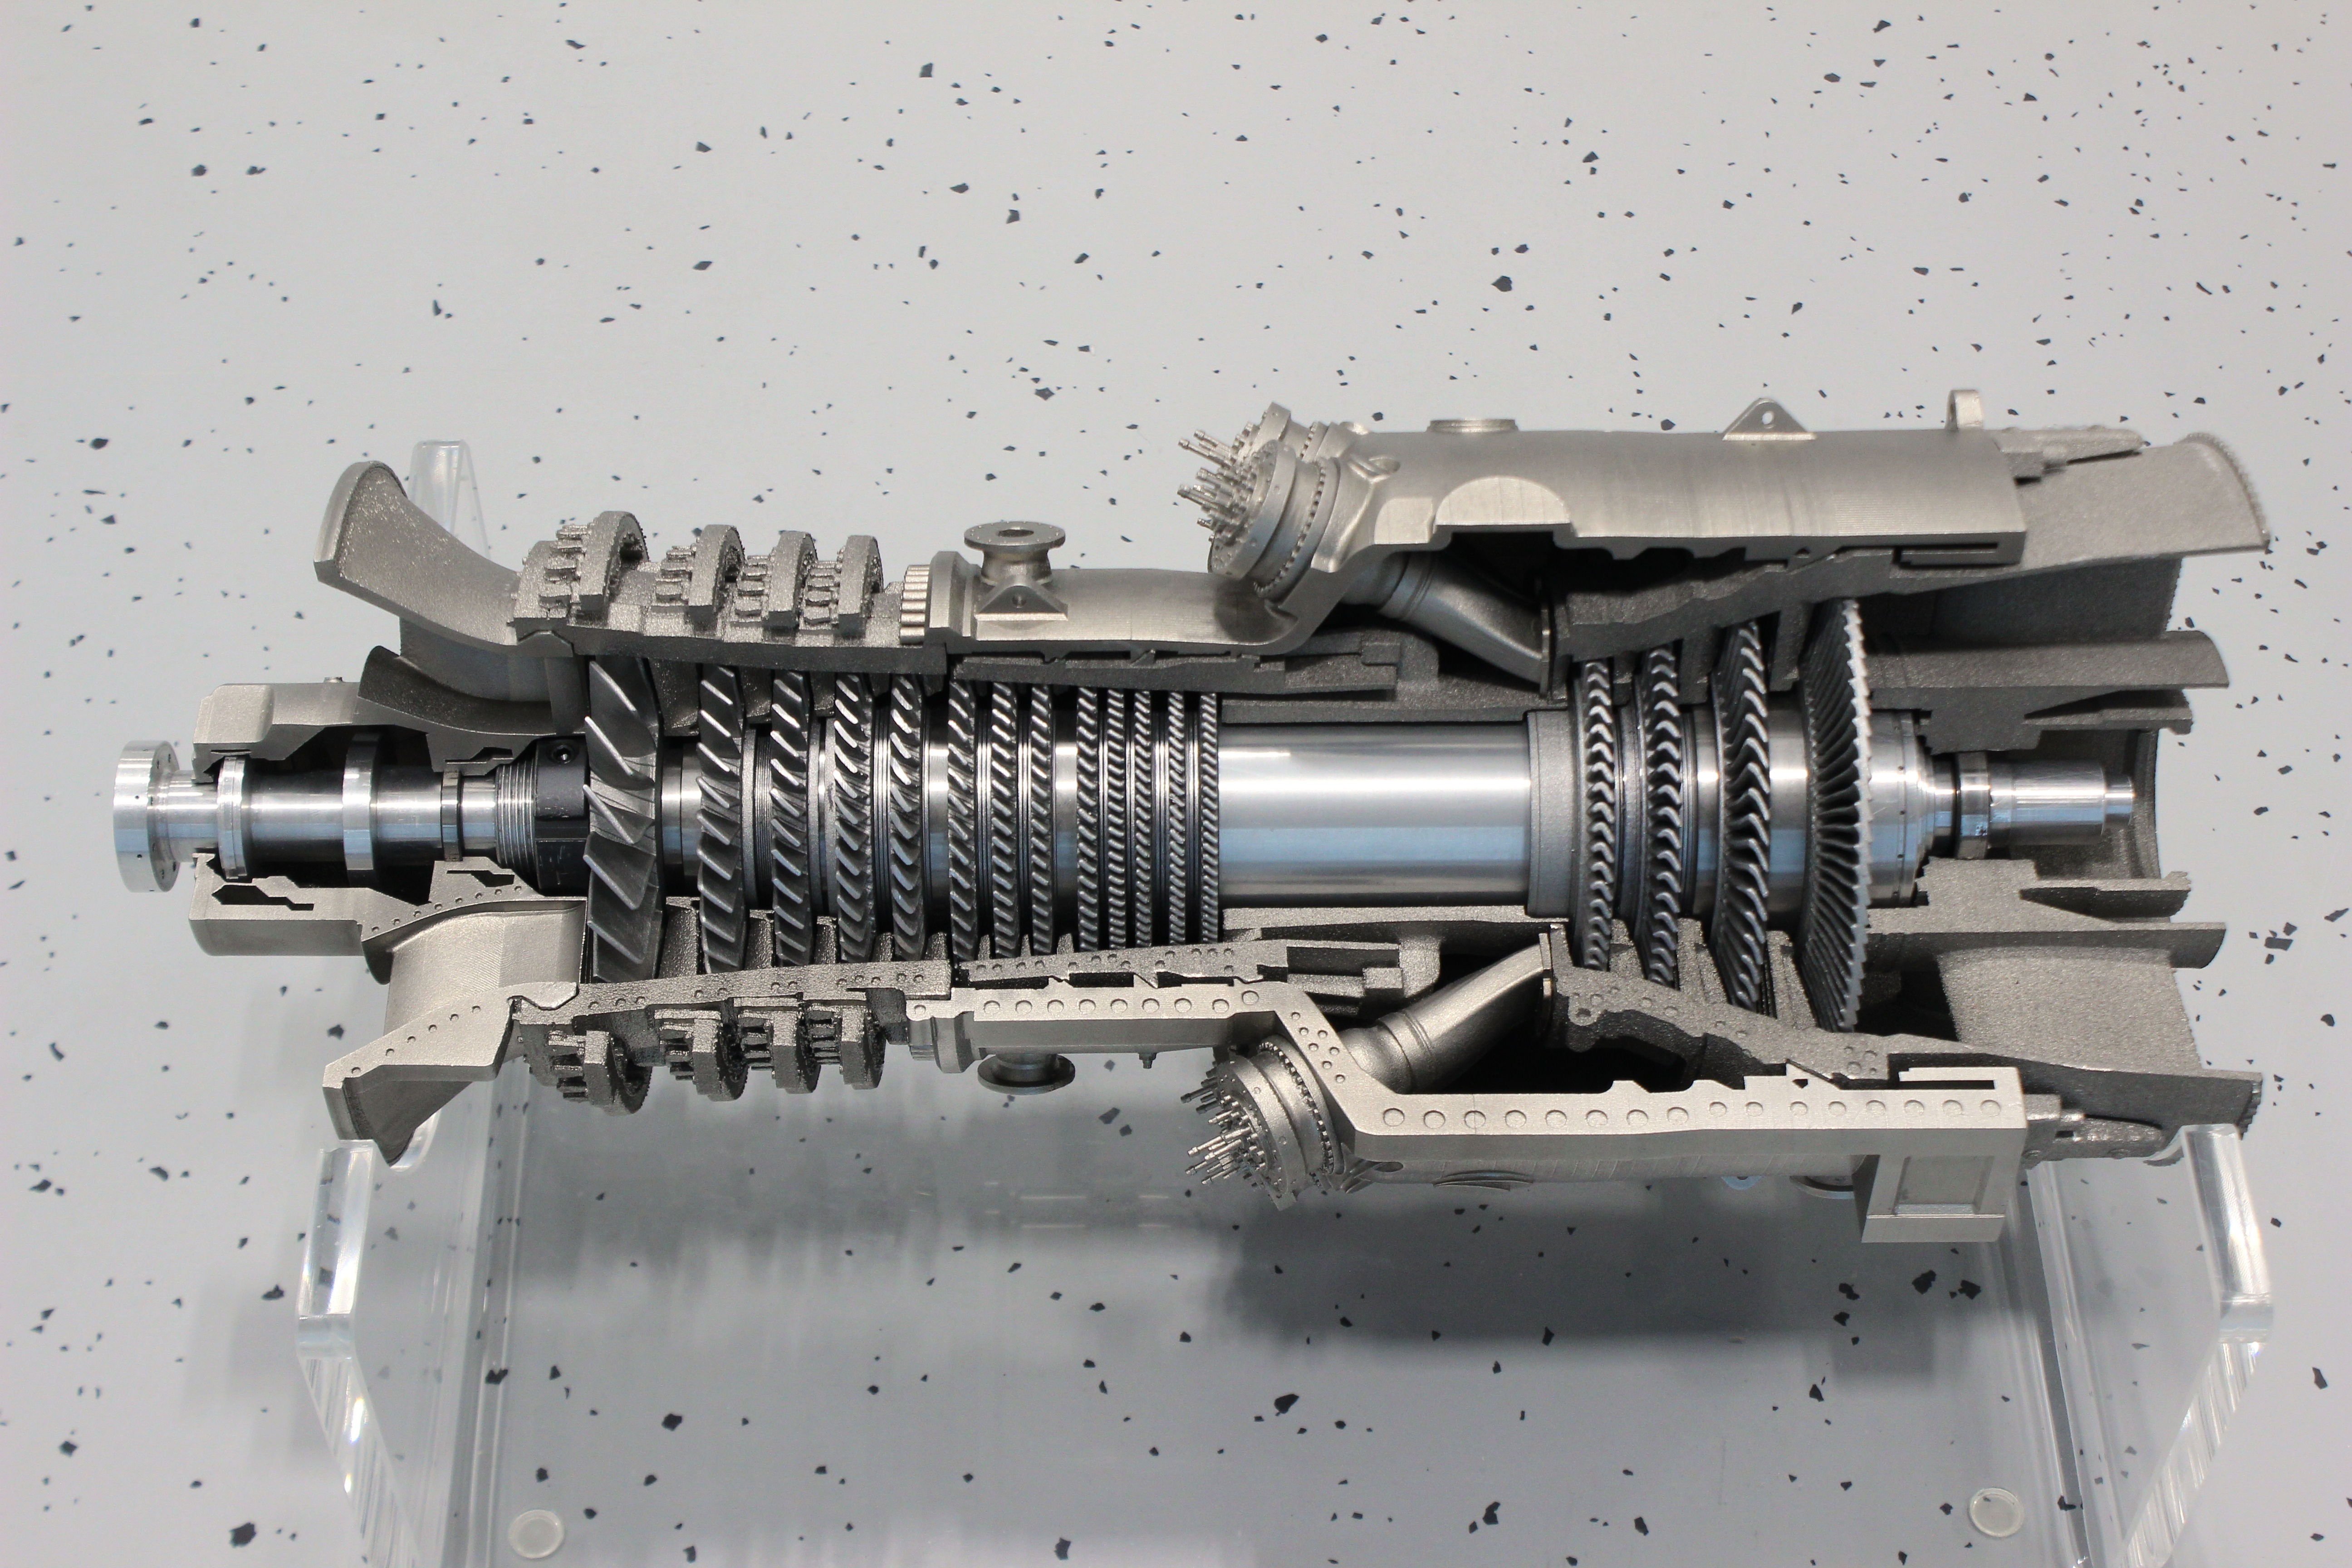 Scaled model of a gas turbine for power generation; completely manufactured with additive manufacturing technologies